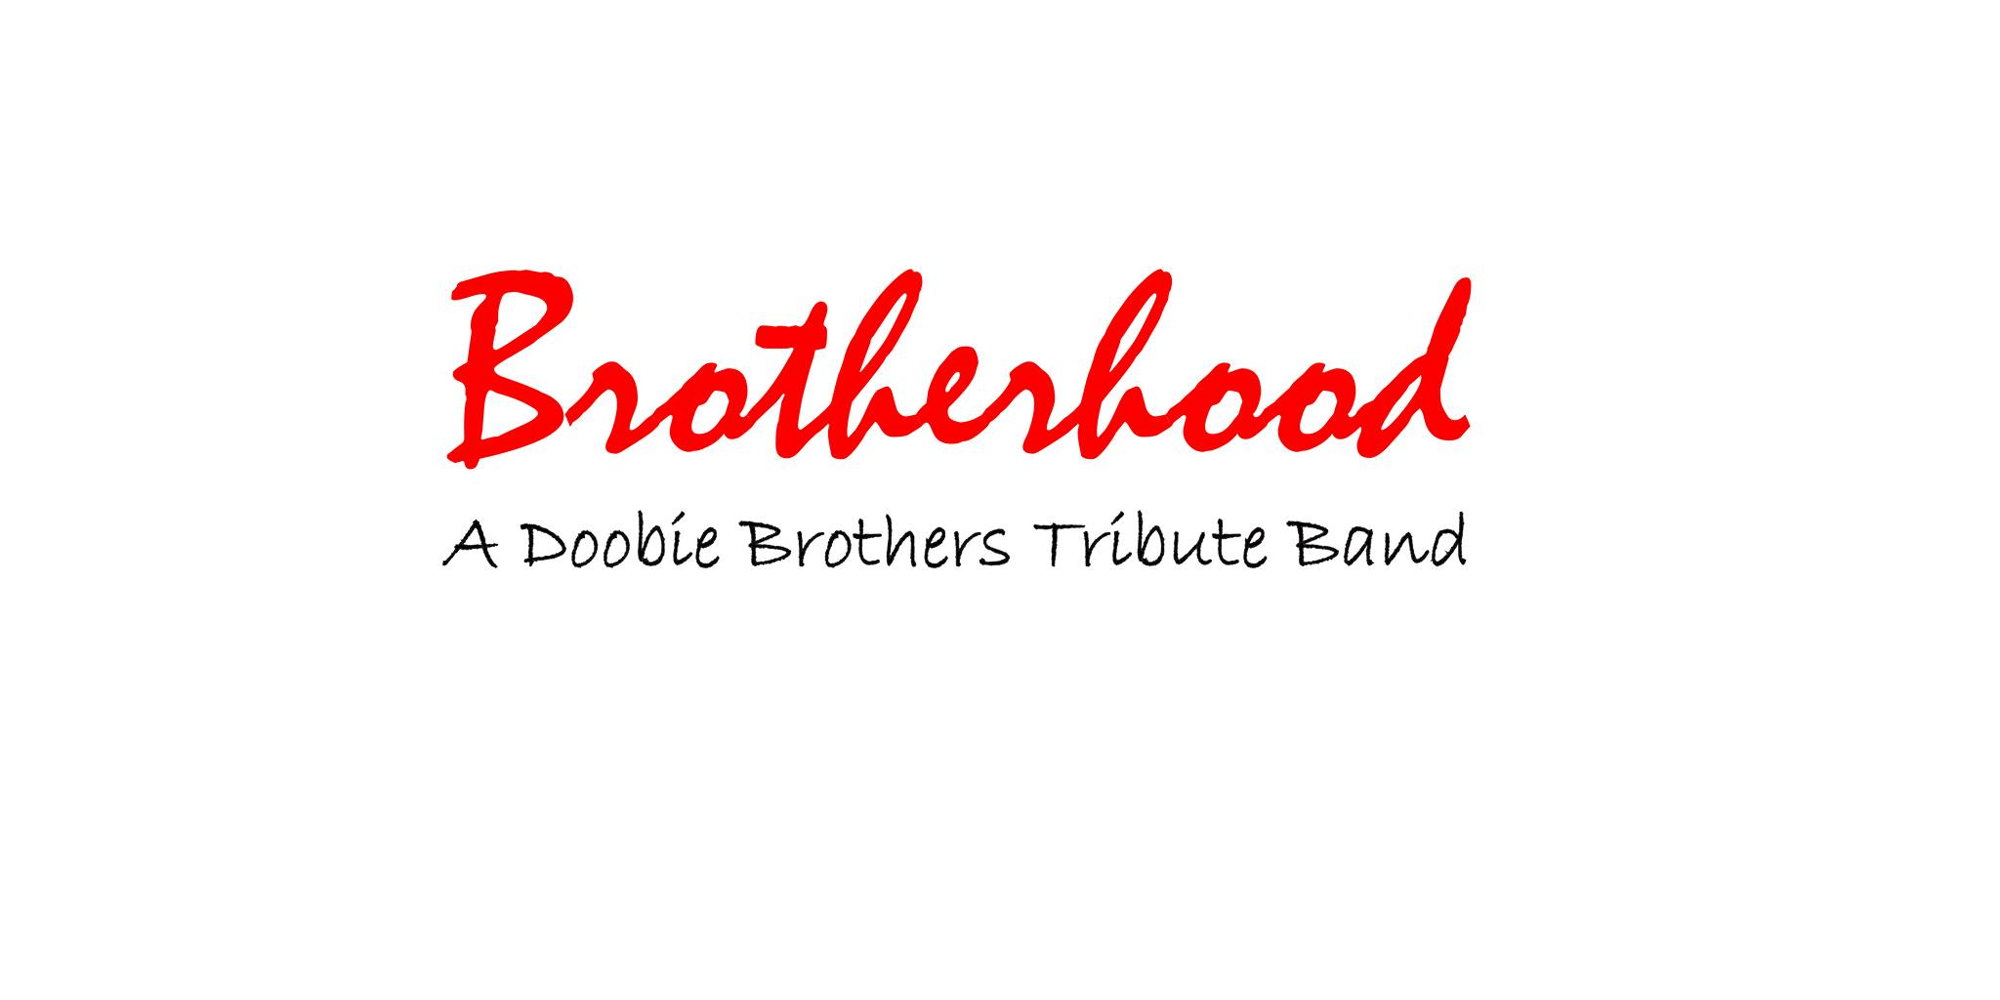 Brotherhood (A Tribute to The Doobie Brothers) promotional image